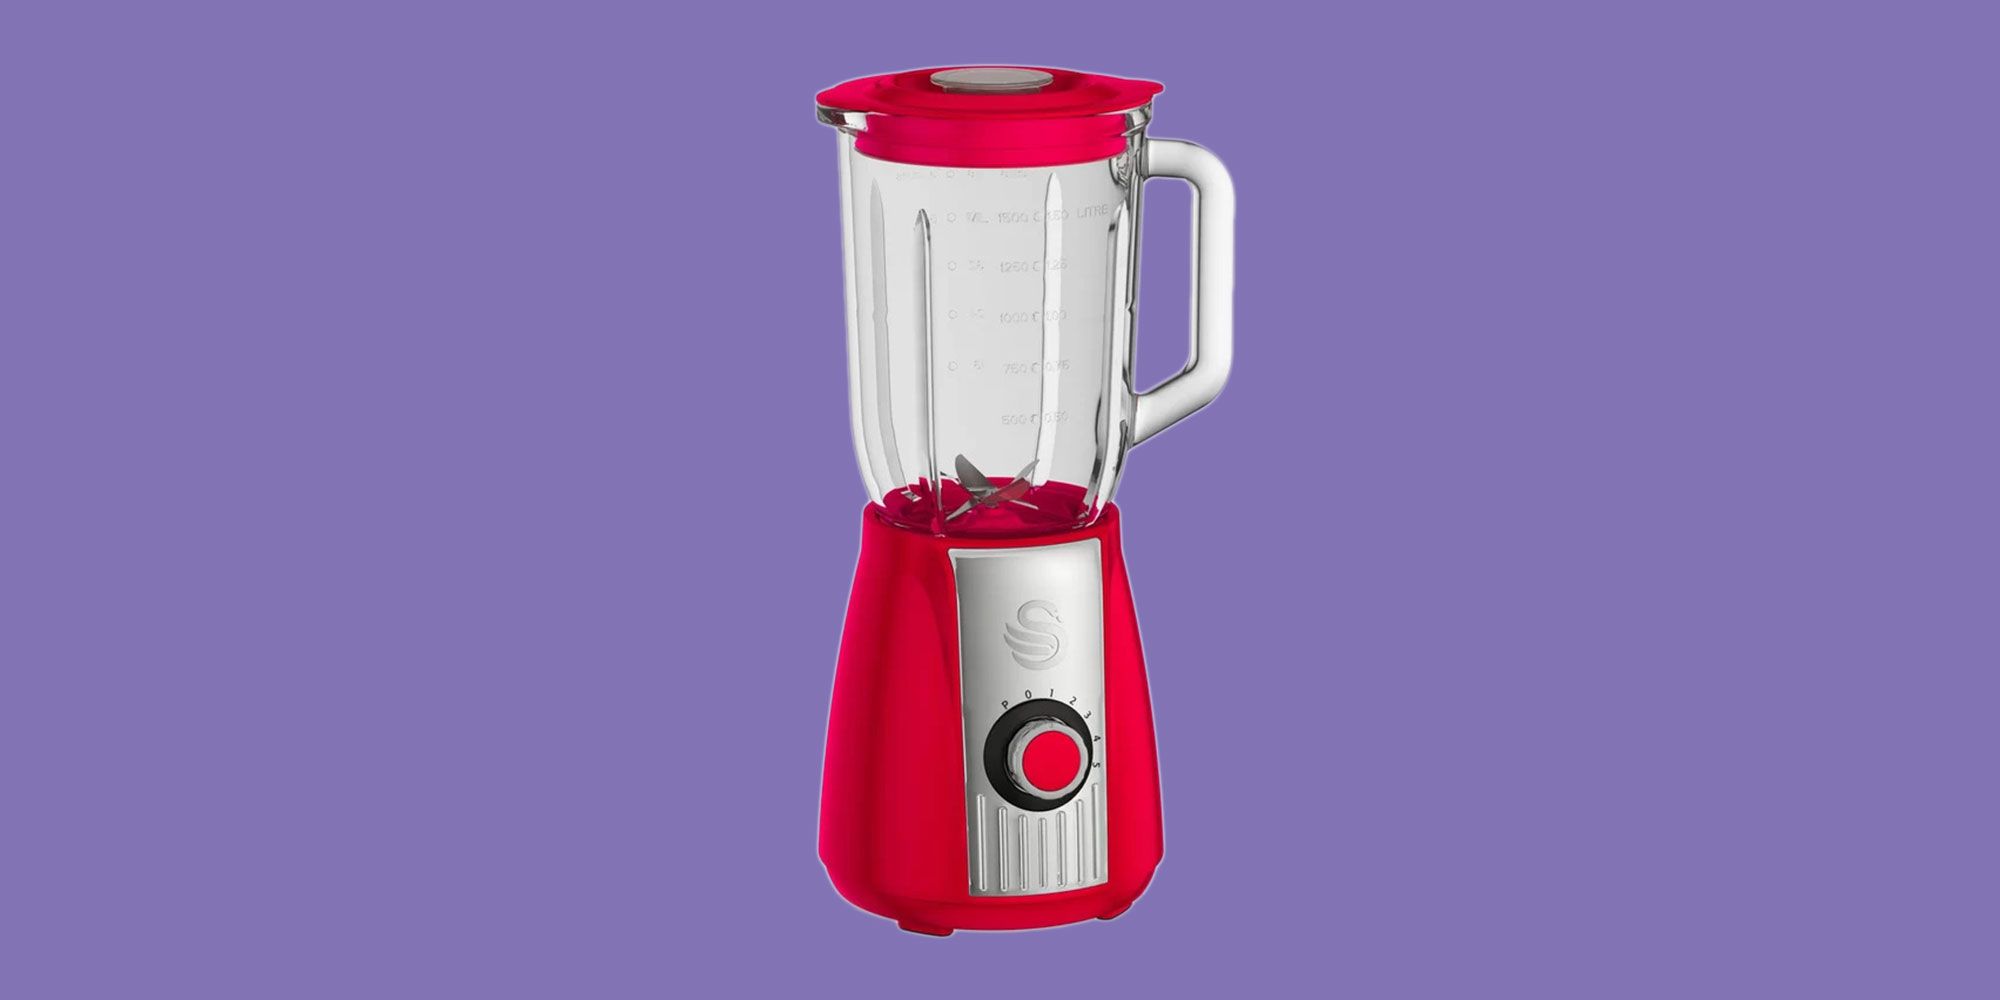 Russell Hobbs Go Create Glass Jug Blender 25970 review - Which?